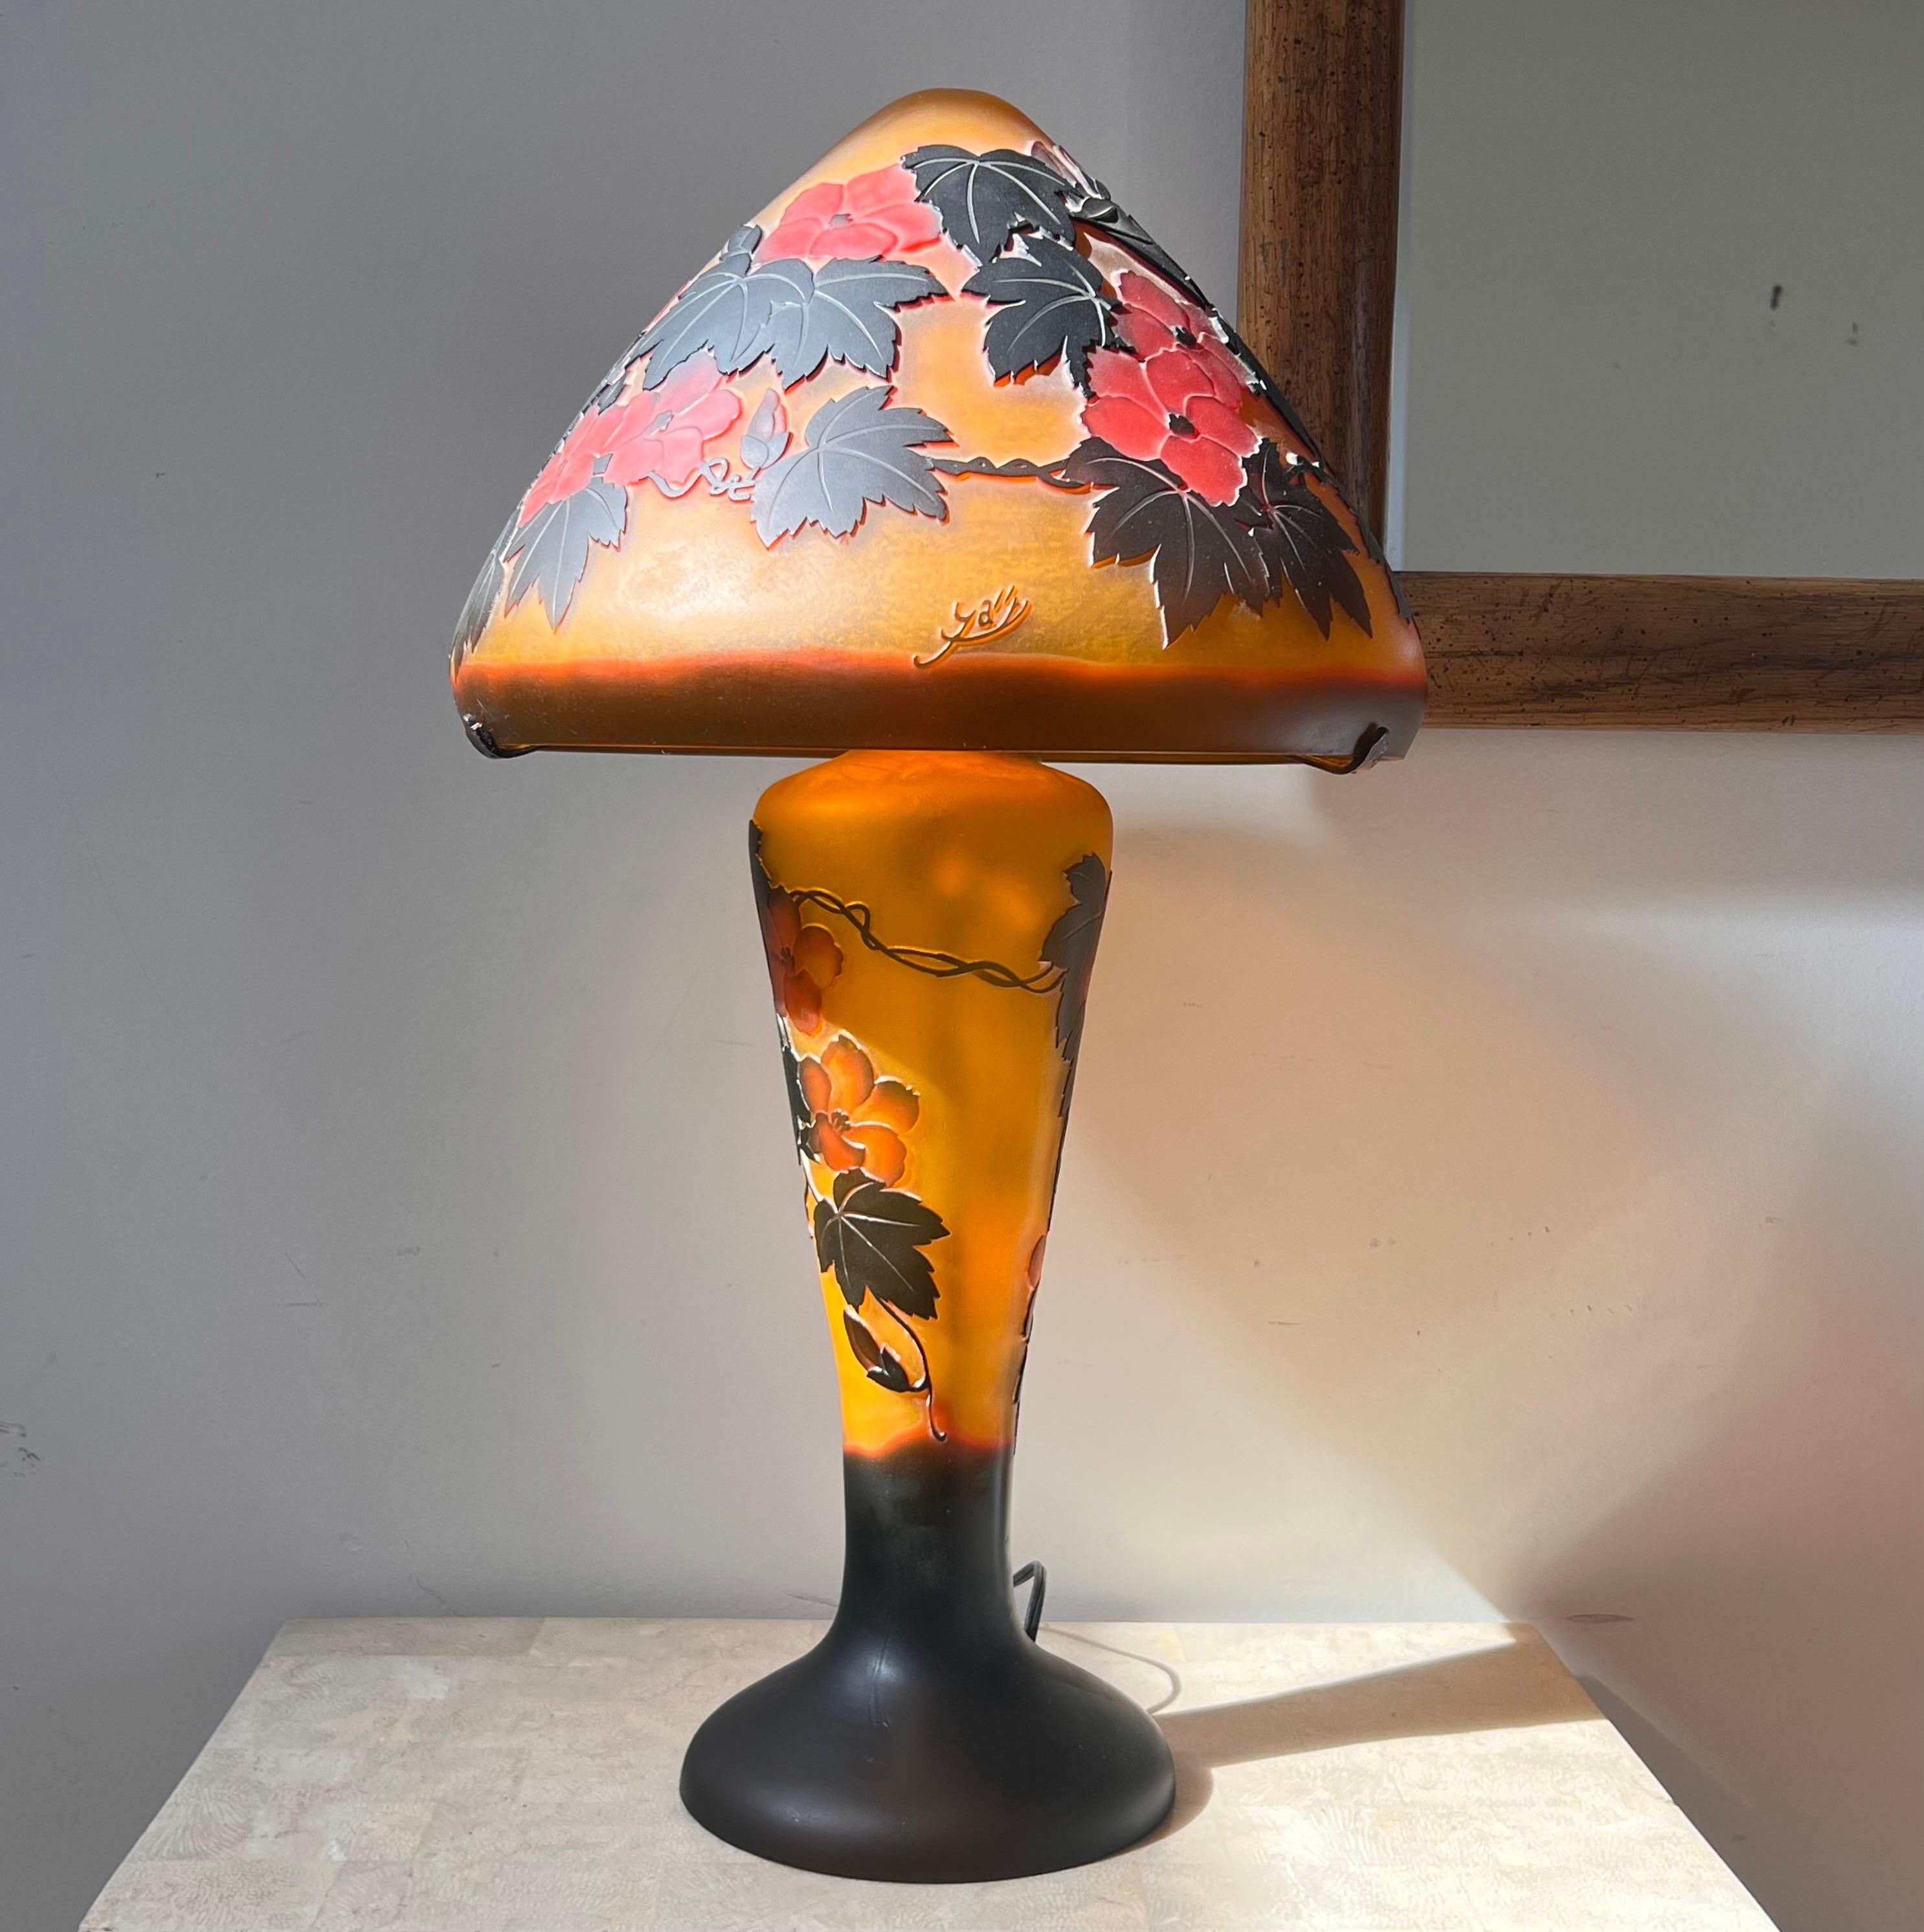 An Art Nouveau French Cameo glass table lamp after Émile Gallé, circa 1975. Signed at the edge of the shade. Autumnal shades of mandarin, pewter, and pomegranate, and in fabulous working condition. This is an authorized authentic reproduction of the